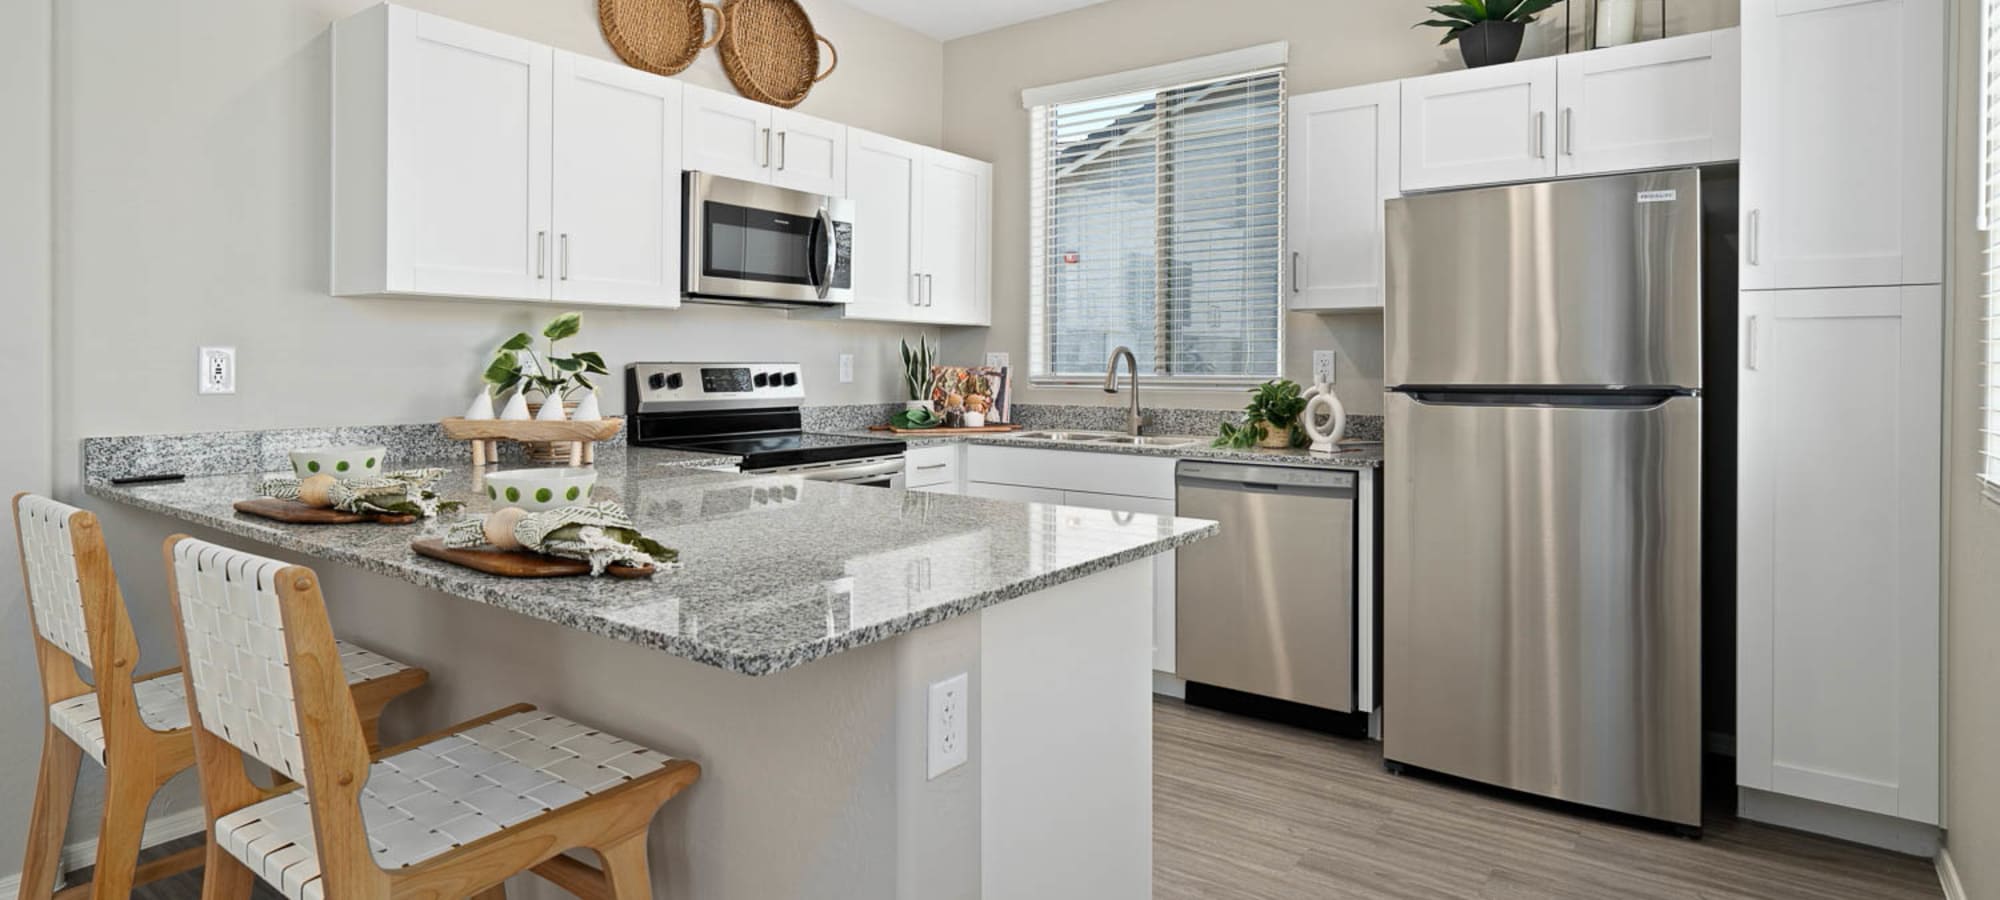 Modern Kitchen at Cottages at McDowell in Avondale, Arizona